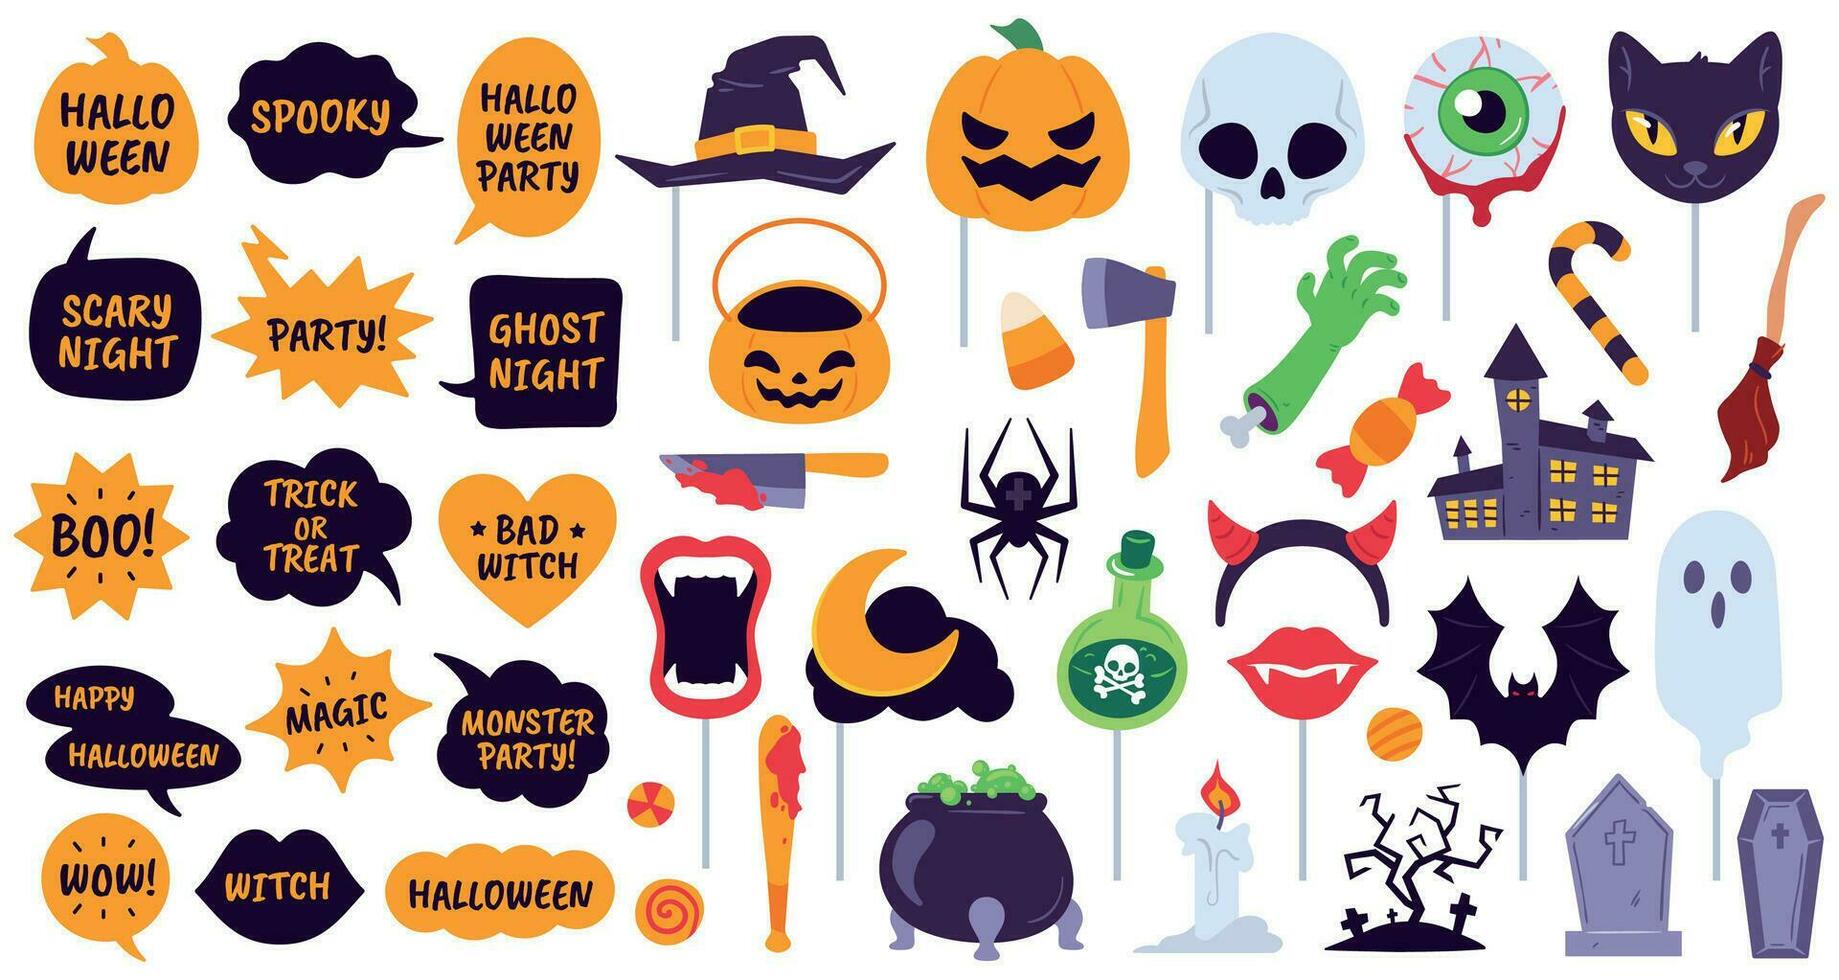 Halloween props. Holiday accessories speech bubbles with phrases, pumpkin, skull and devil hat. Spider, ghost and bat, broom vector icons